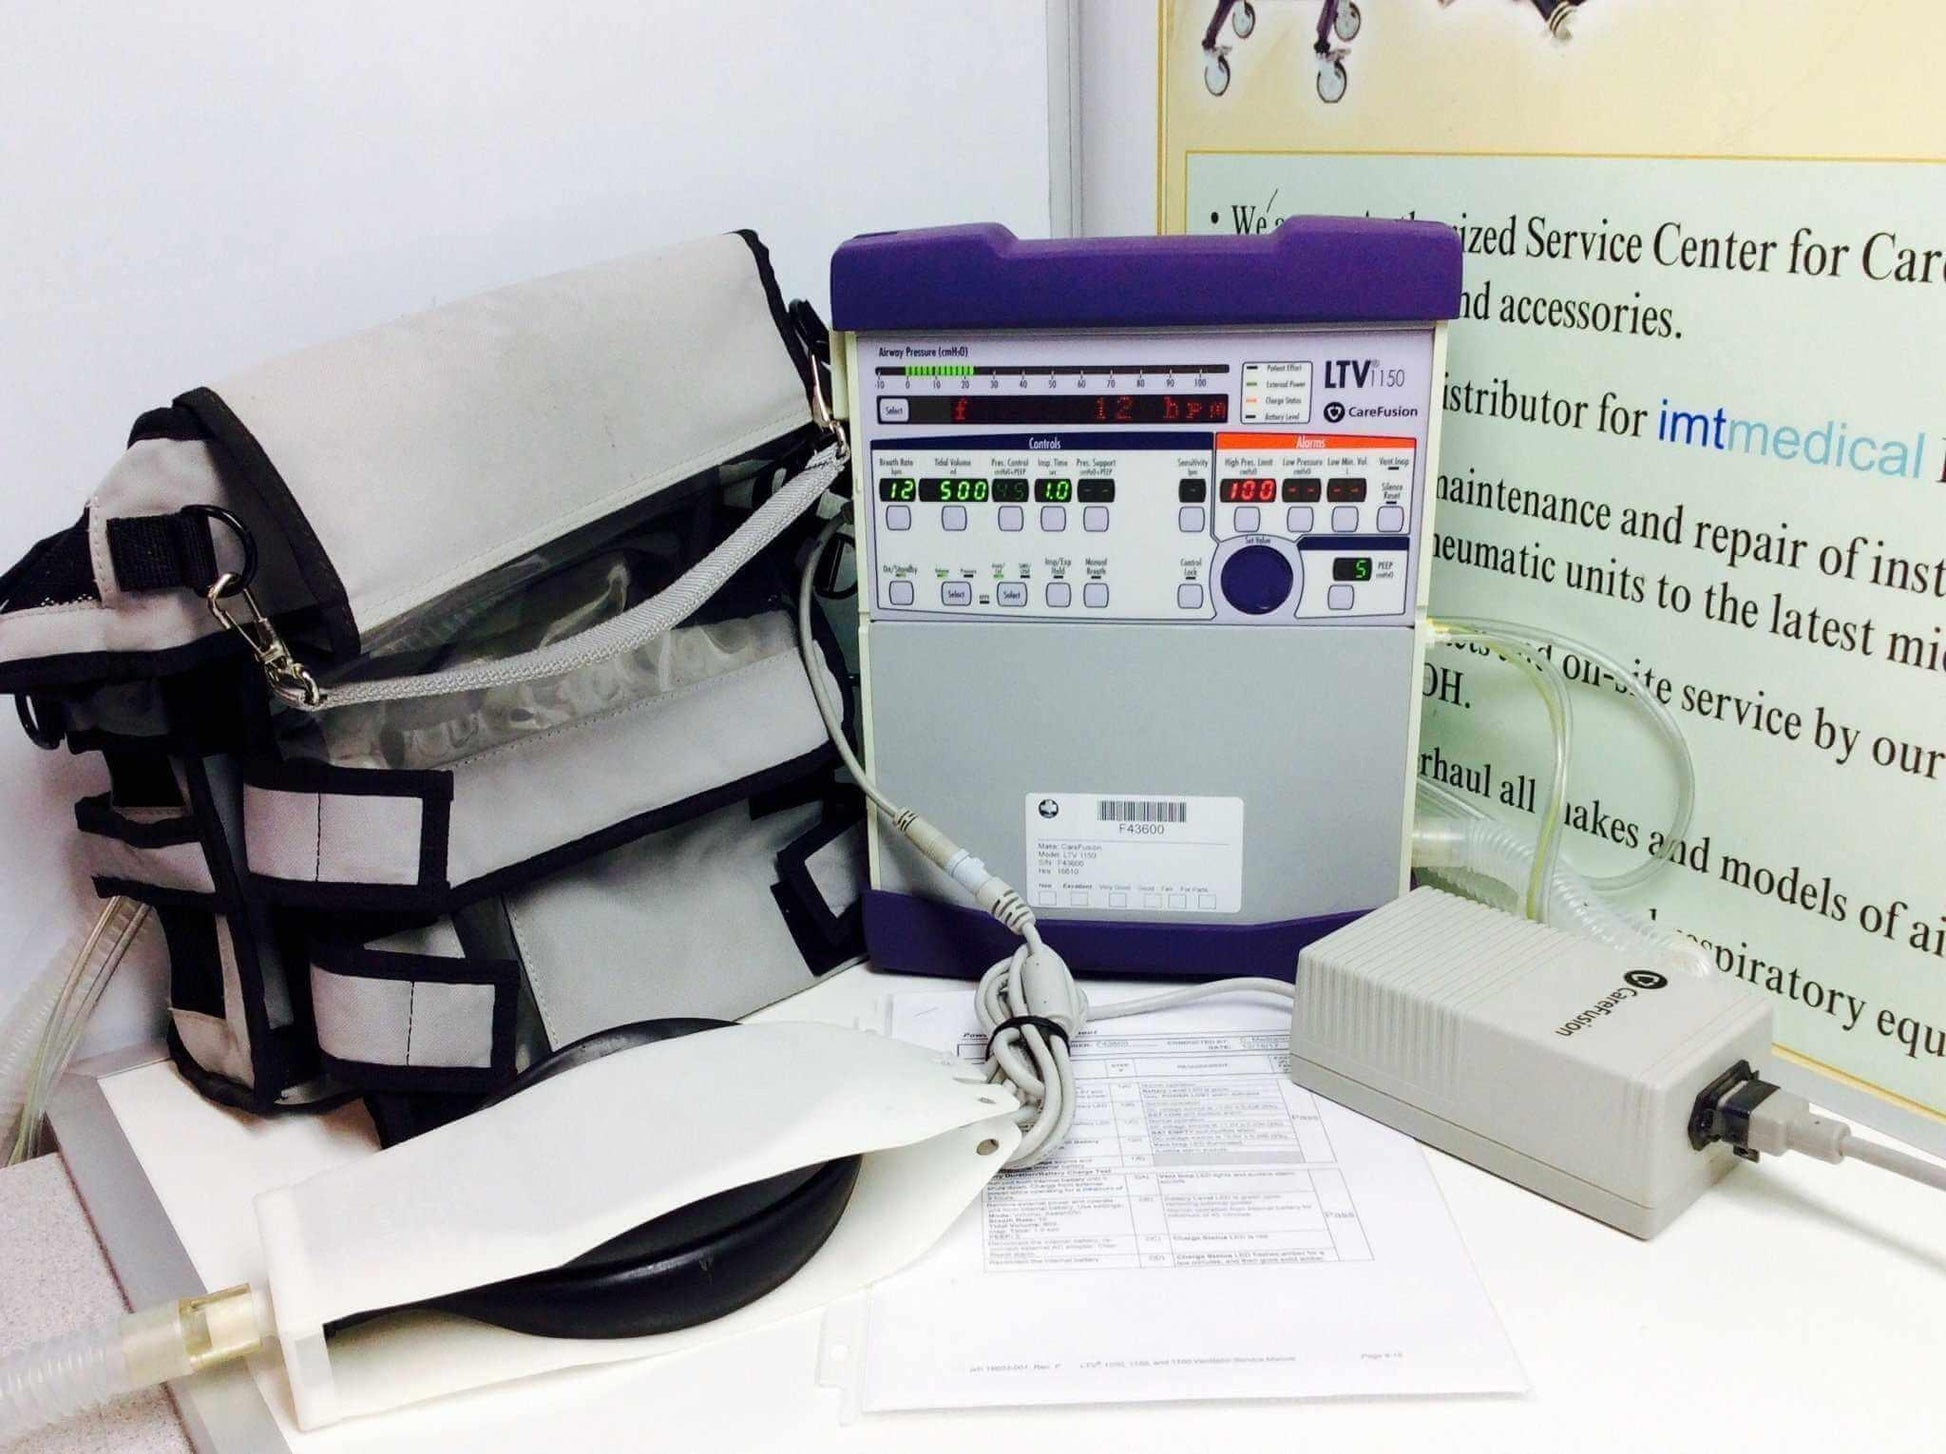 REFURBISHED Certified Patient Ready CareFusion LTV 1150 Ventilator with 24 Month Warranty - MBR Medicals